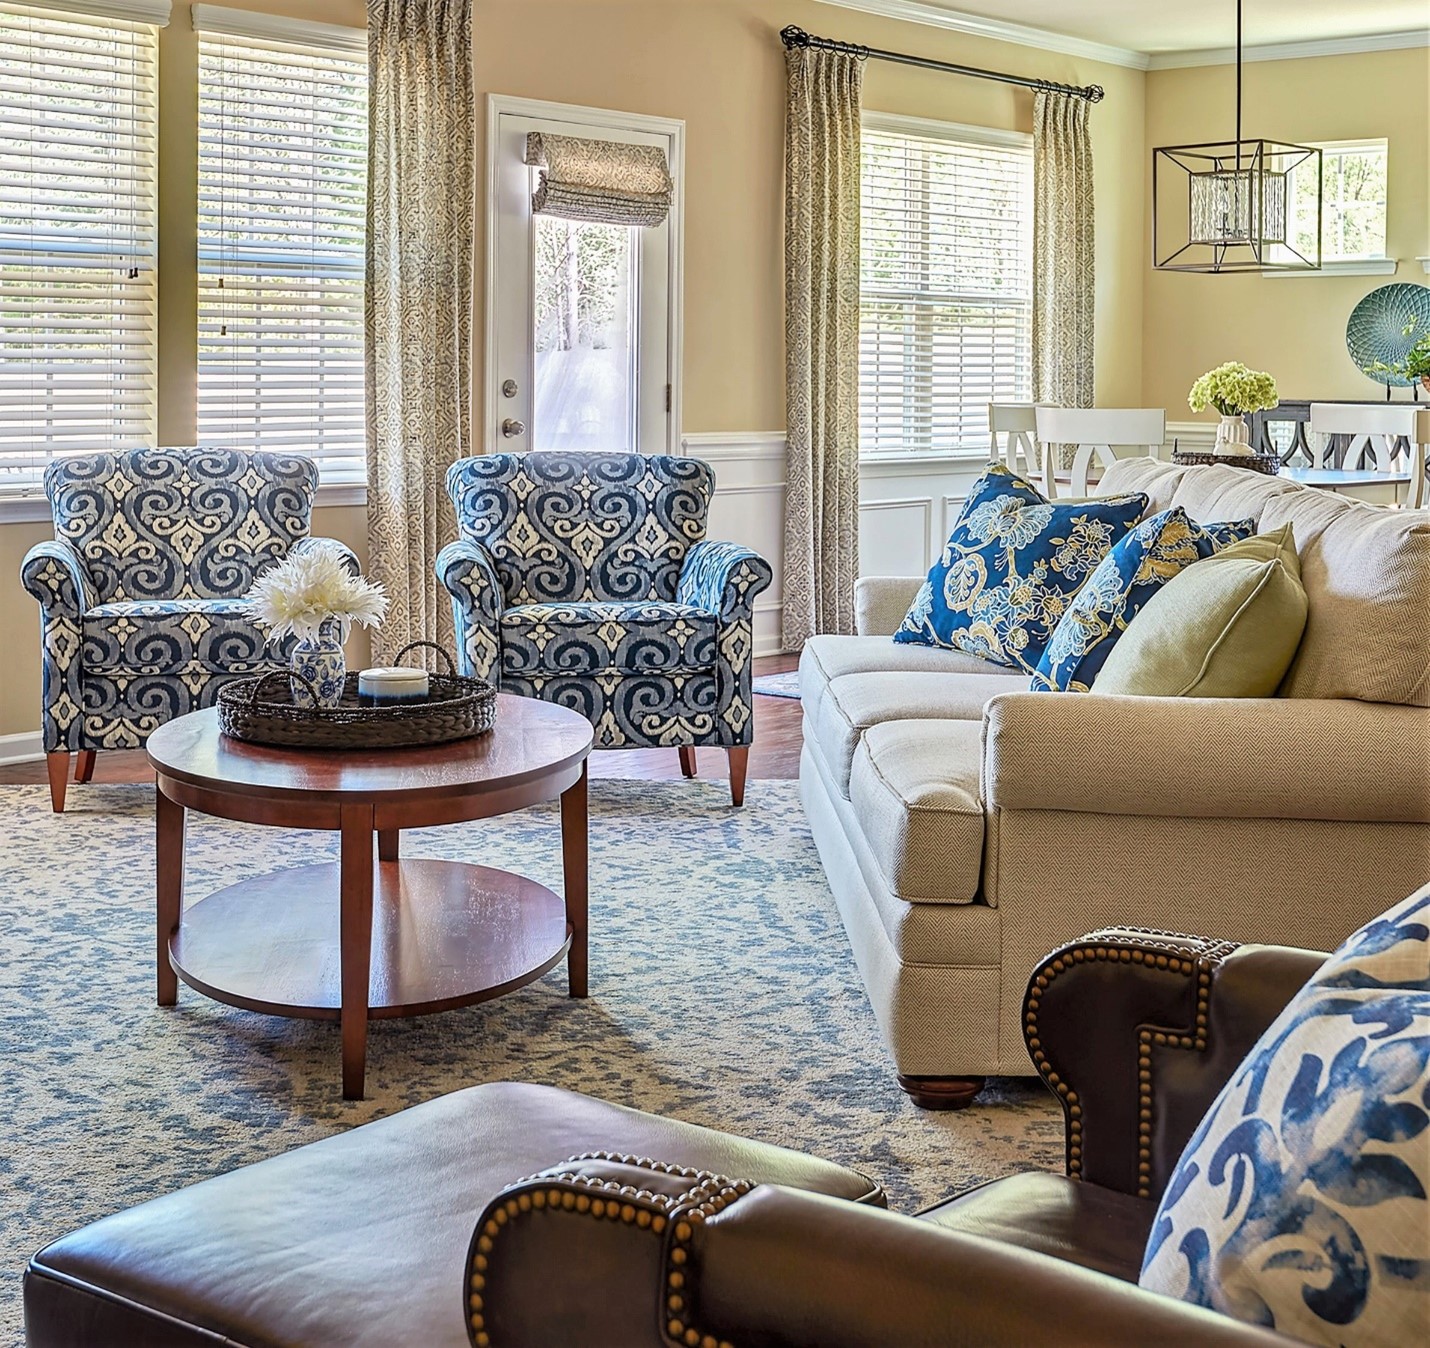 Family Room with nuetral sofa, large print blue chairs and patterned pillows